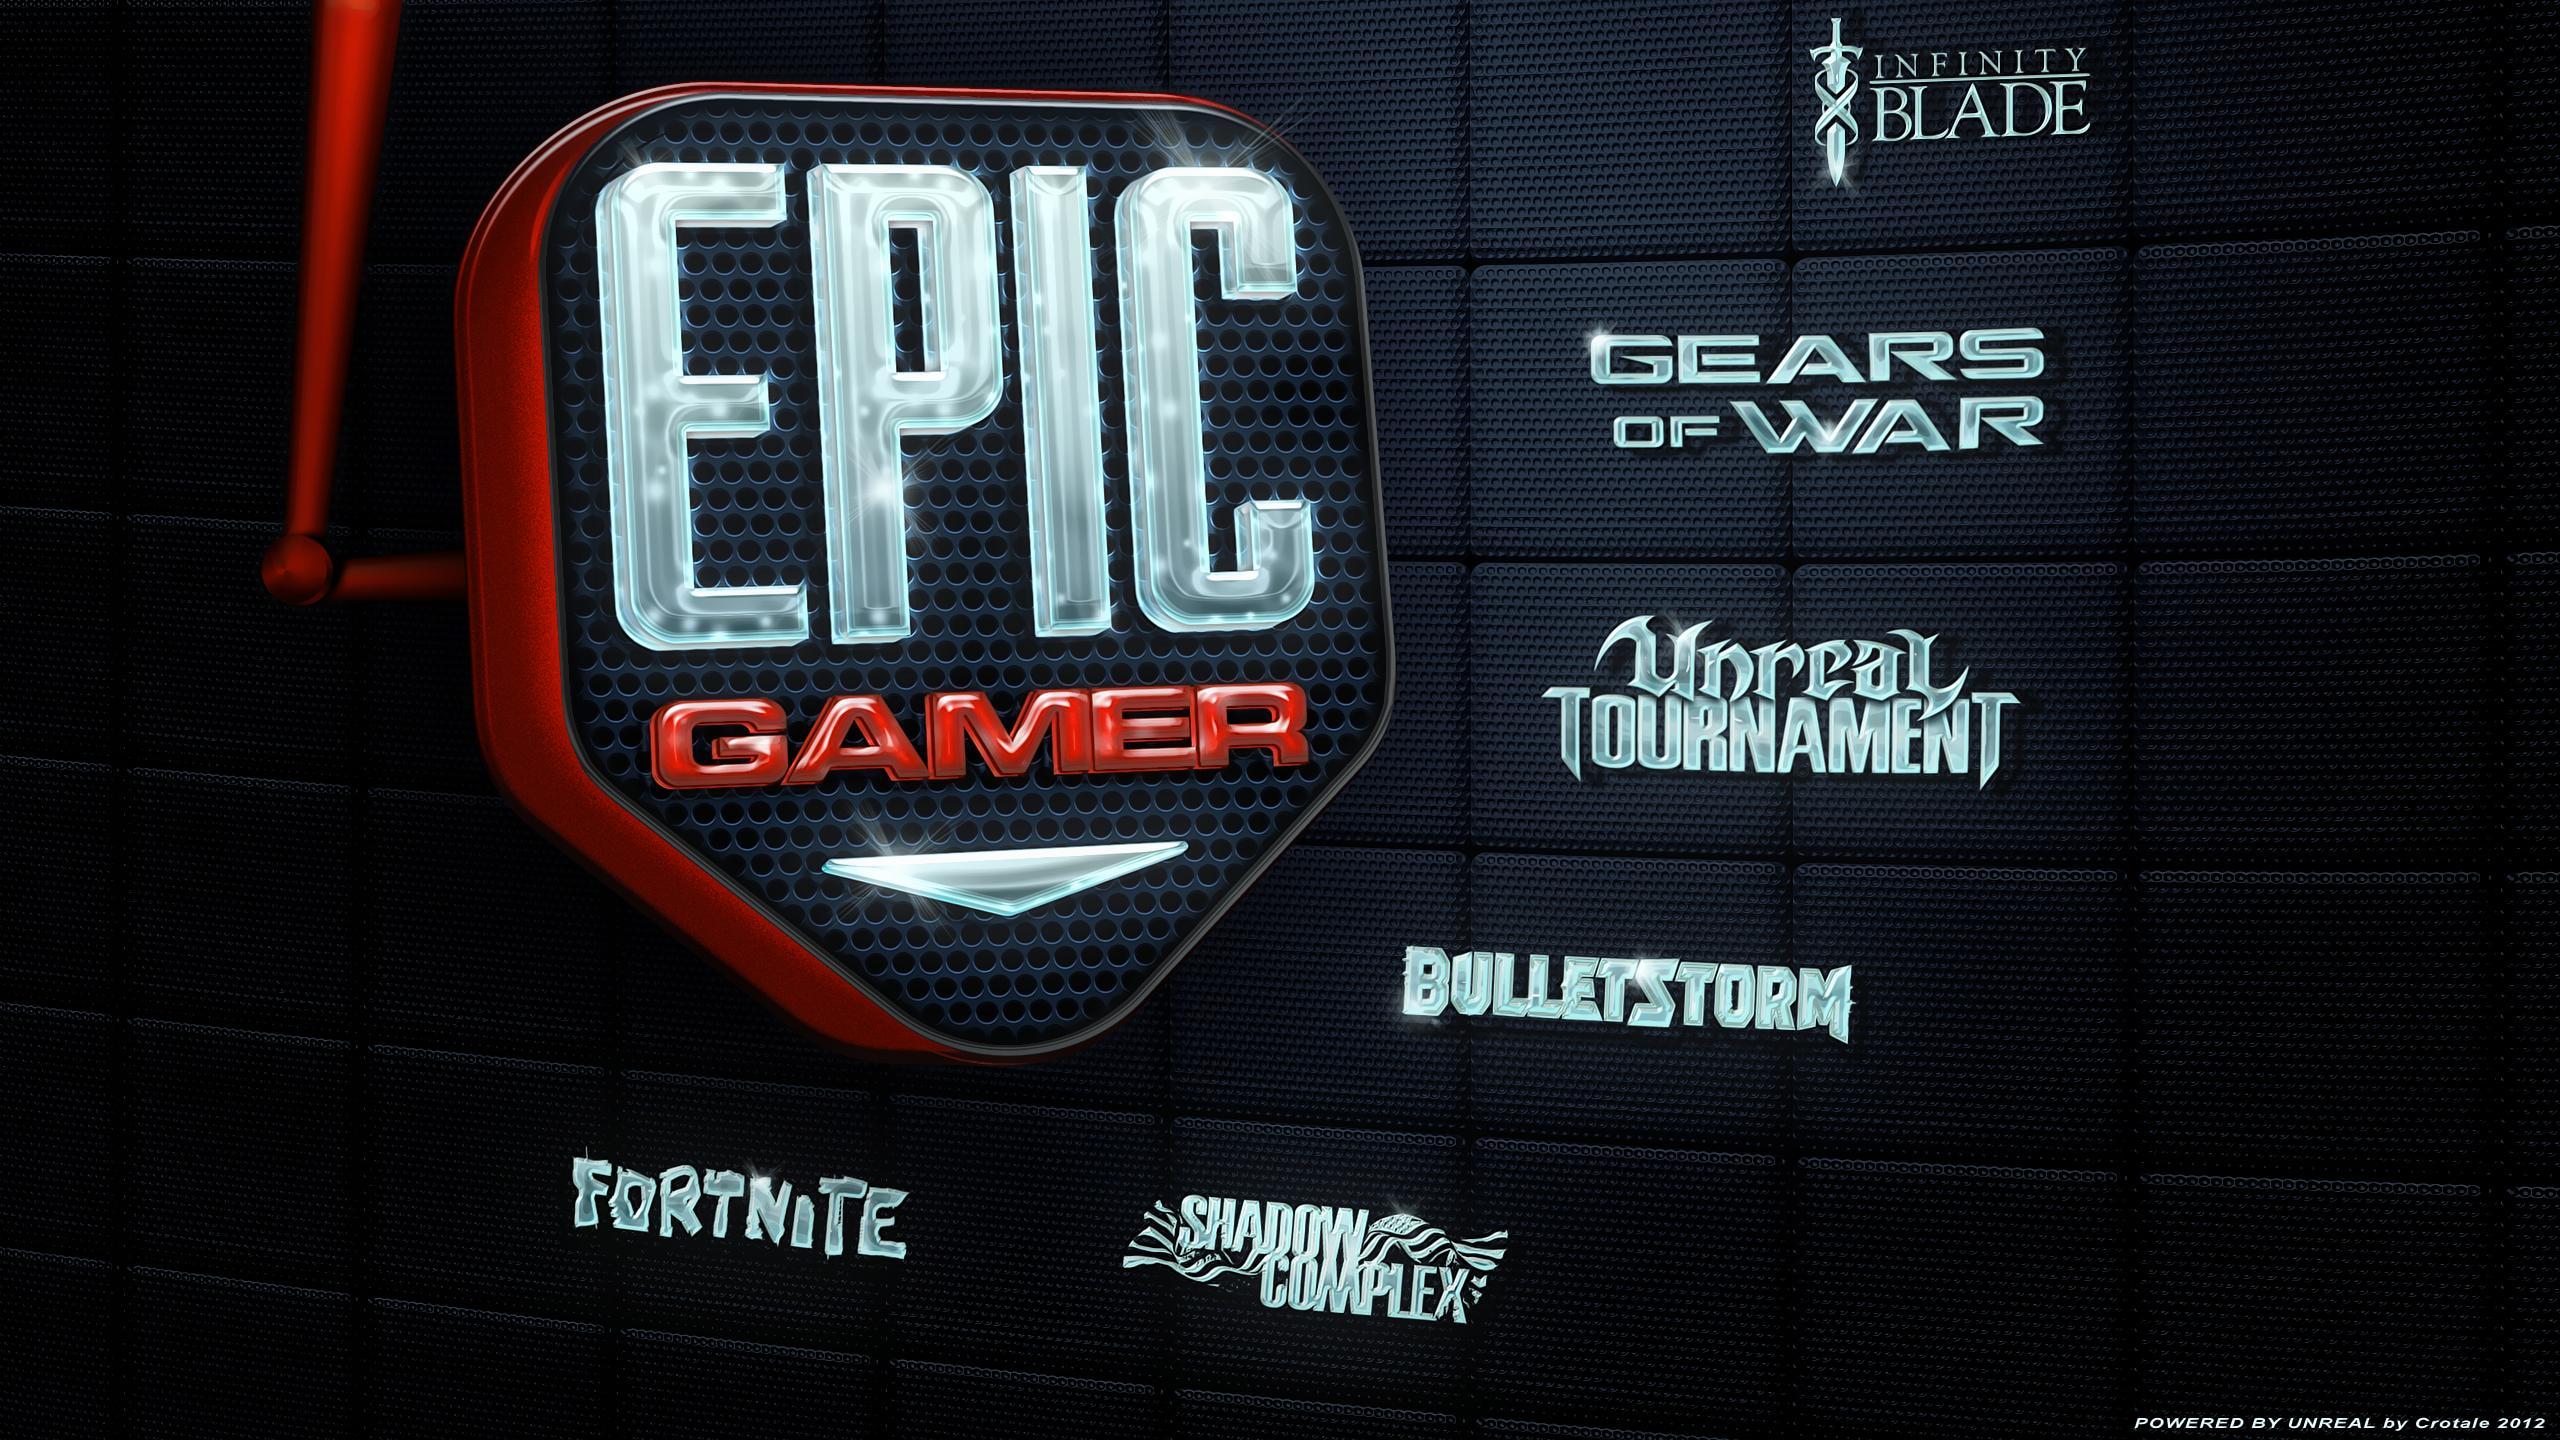 Epic Games Wallpapers